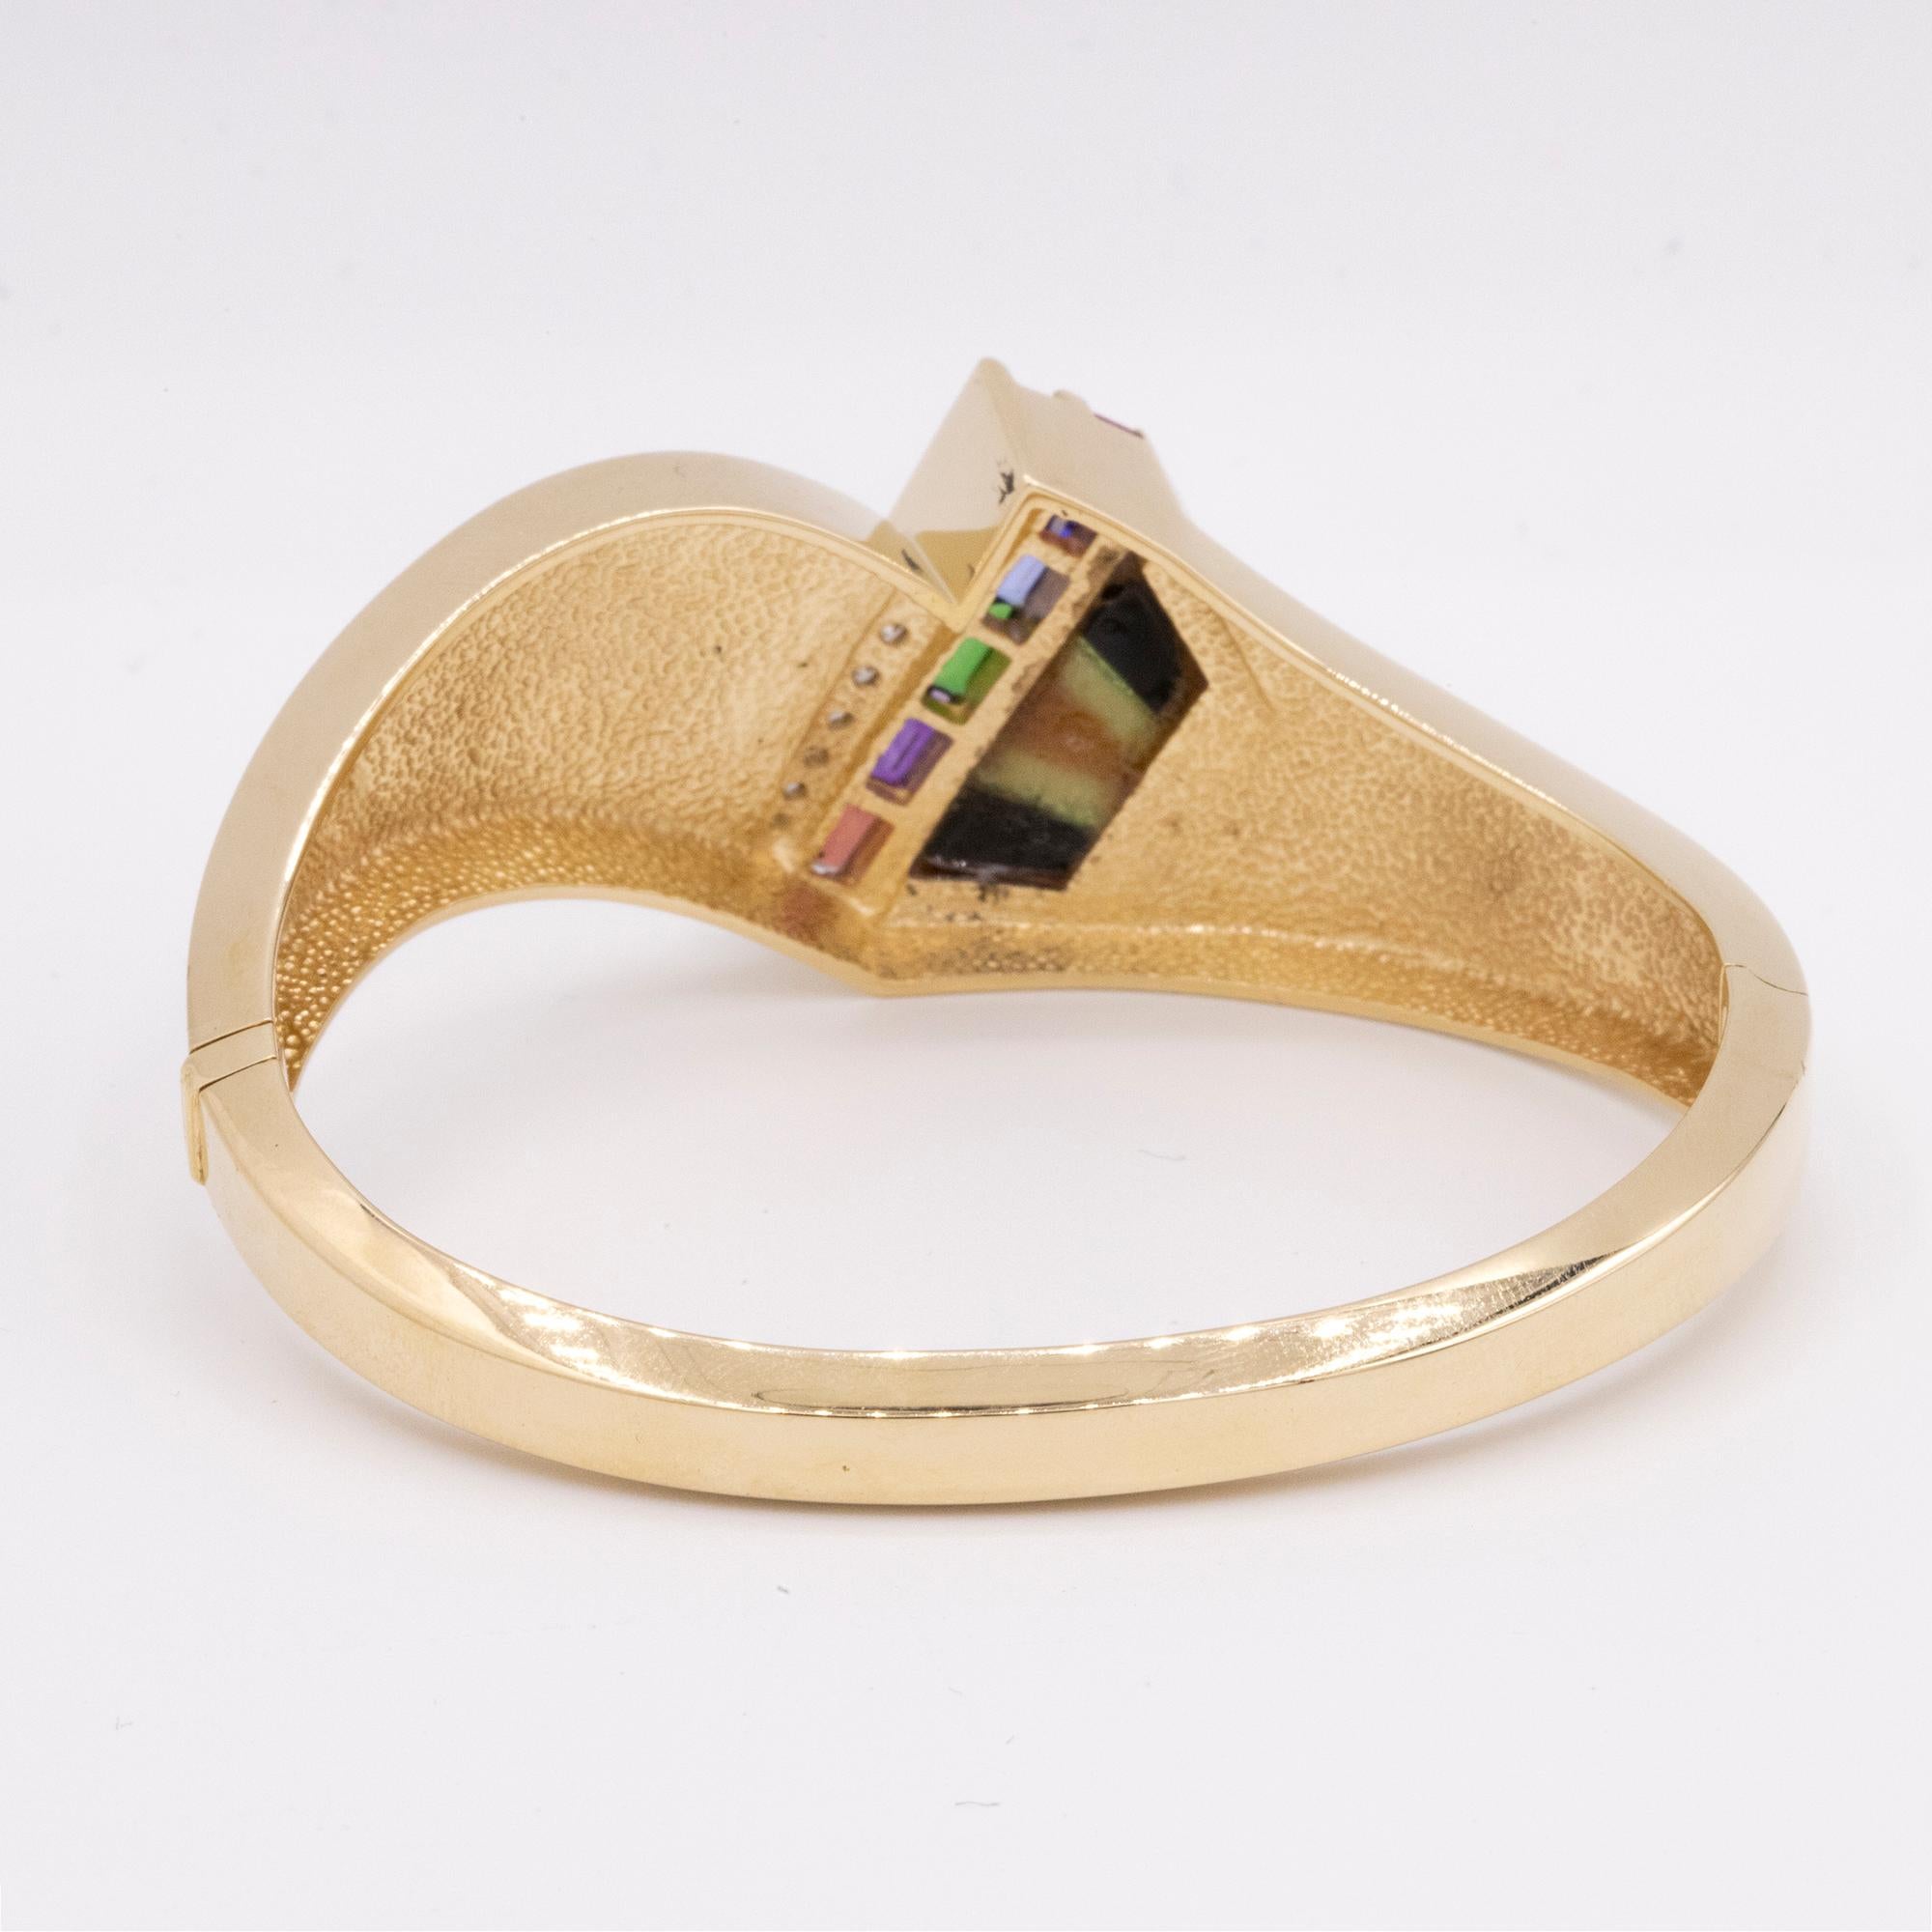 Vintage 14 karat Yellow Gold Cuff with 10 Graduated Diamonds, Multi-Colored Sapphires, inlaid handstone and a fiery Opal. The cuff measures 6mm by 7mm and has a hinge push to open clasp. It has been expertly restored by our Master Jewelers.
